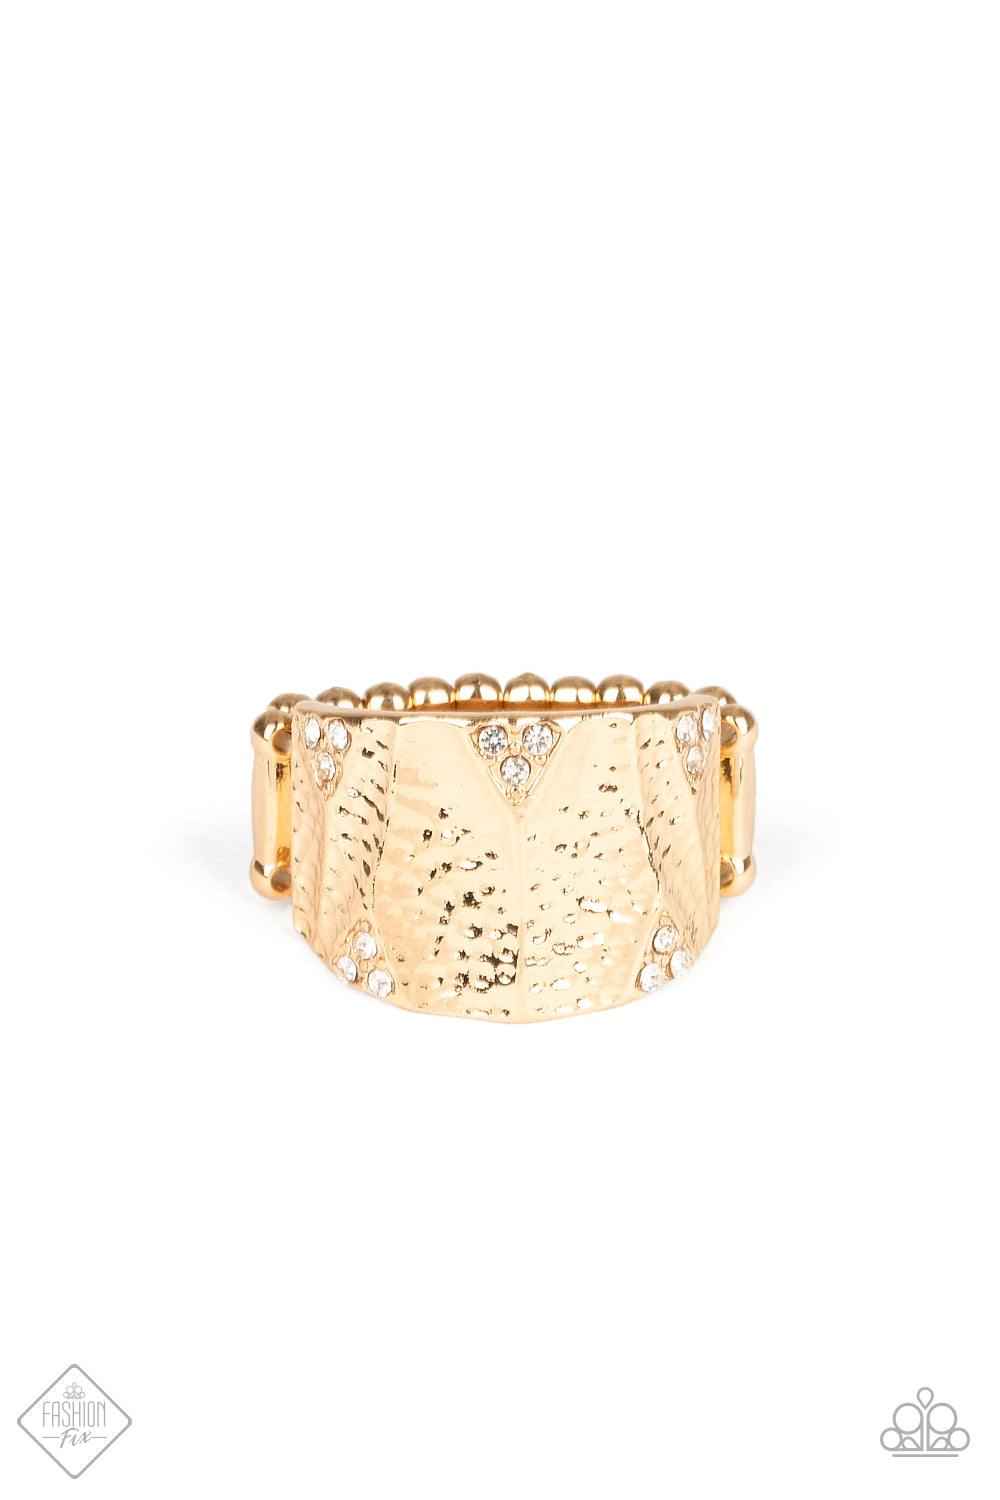 Industrial Indentation Gold Paparazzi Ring Cashmere Pink Jewels - Cashmere Pink Jewels & Accessories, Cashmere Pink Jewels & Accessories - Paparazzi